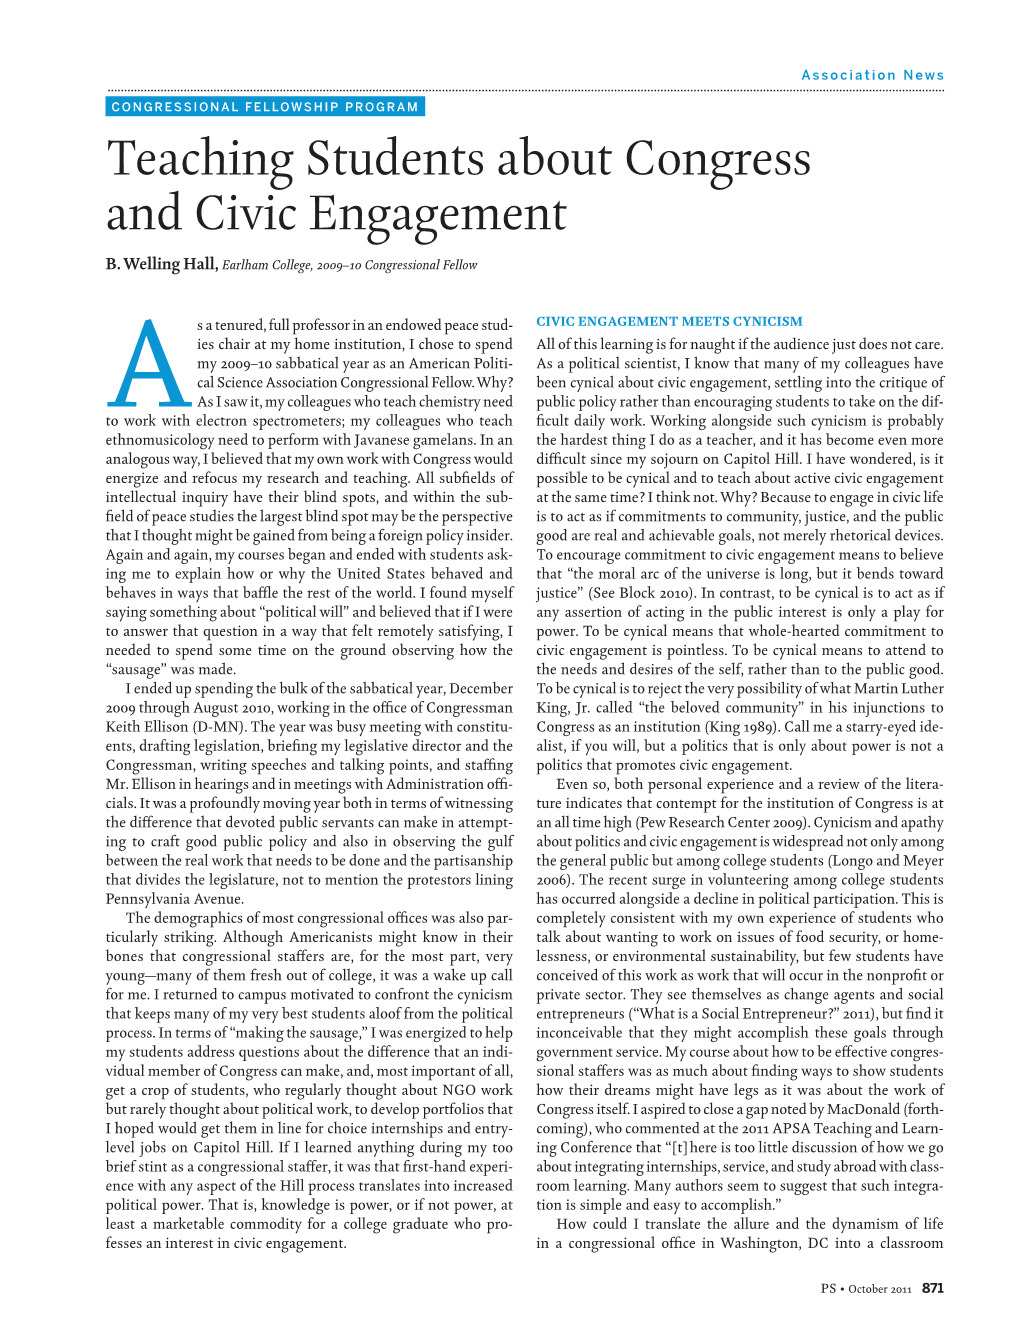 Teaching Students About Congress and Civic Engagement